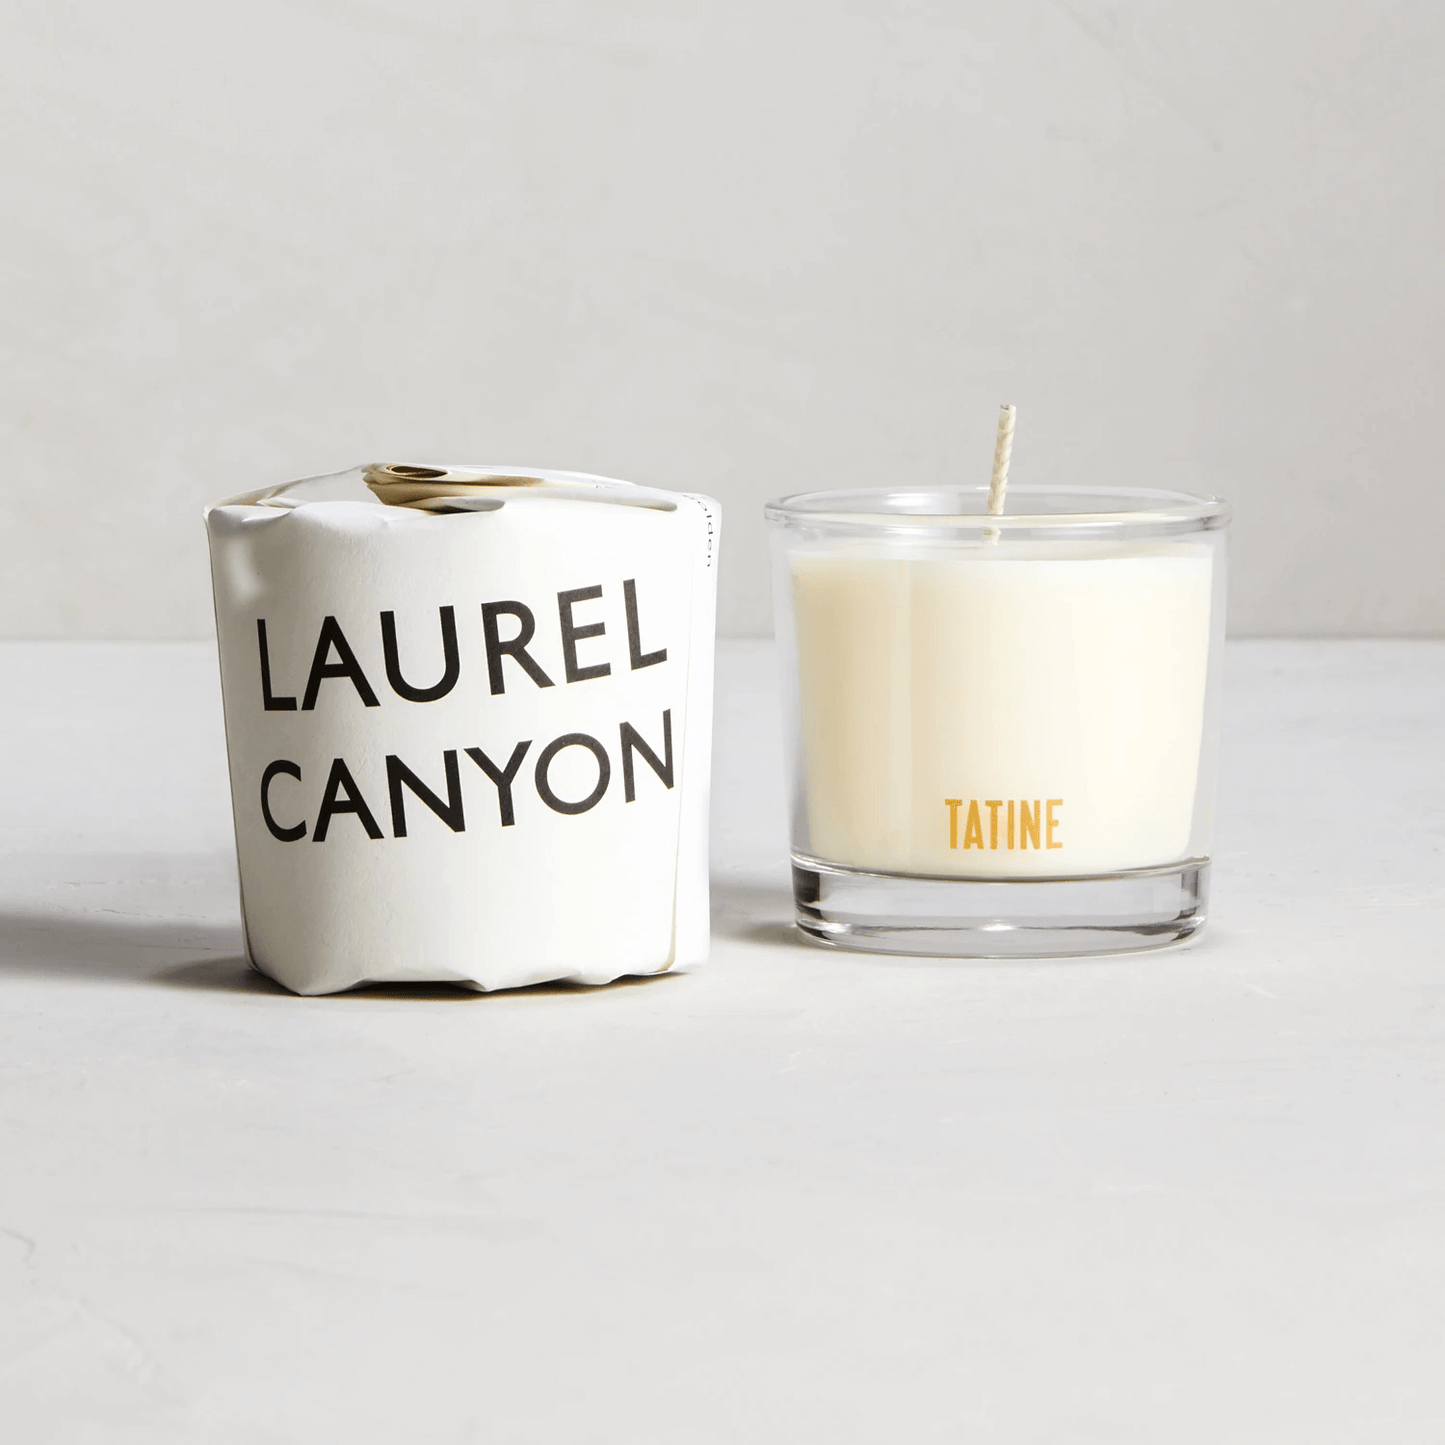 Laurel Canyon Scented Candle by Tatine